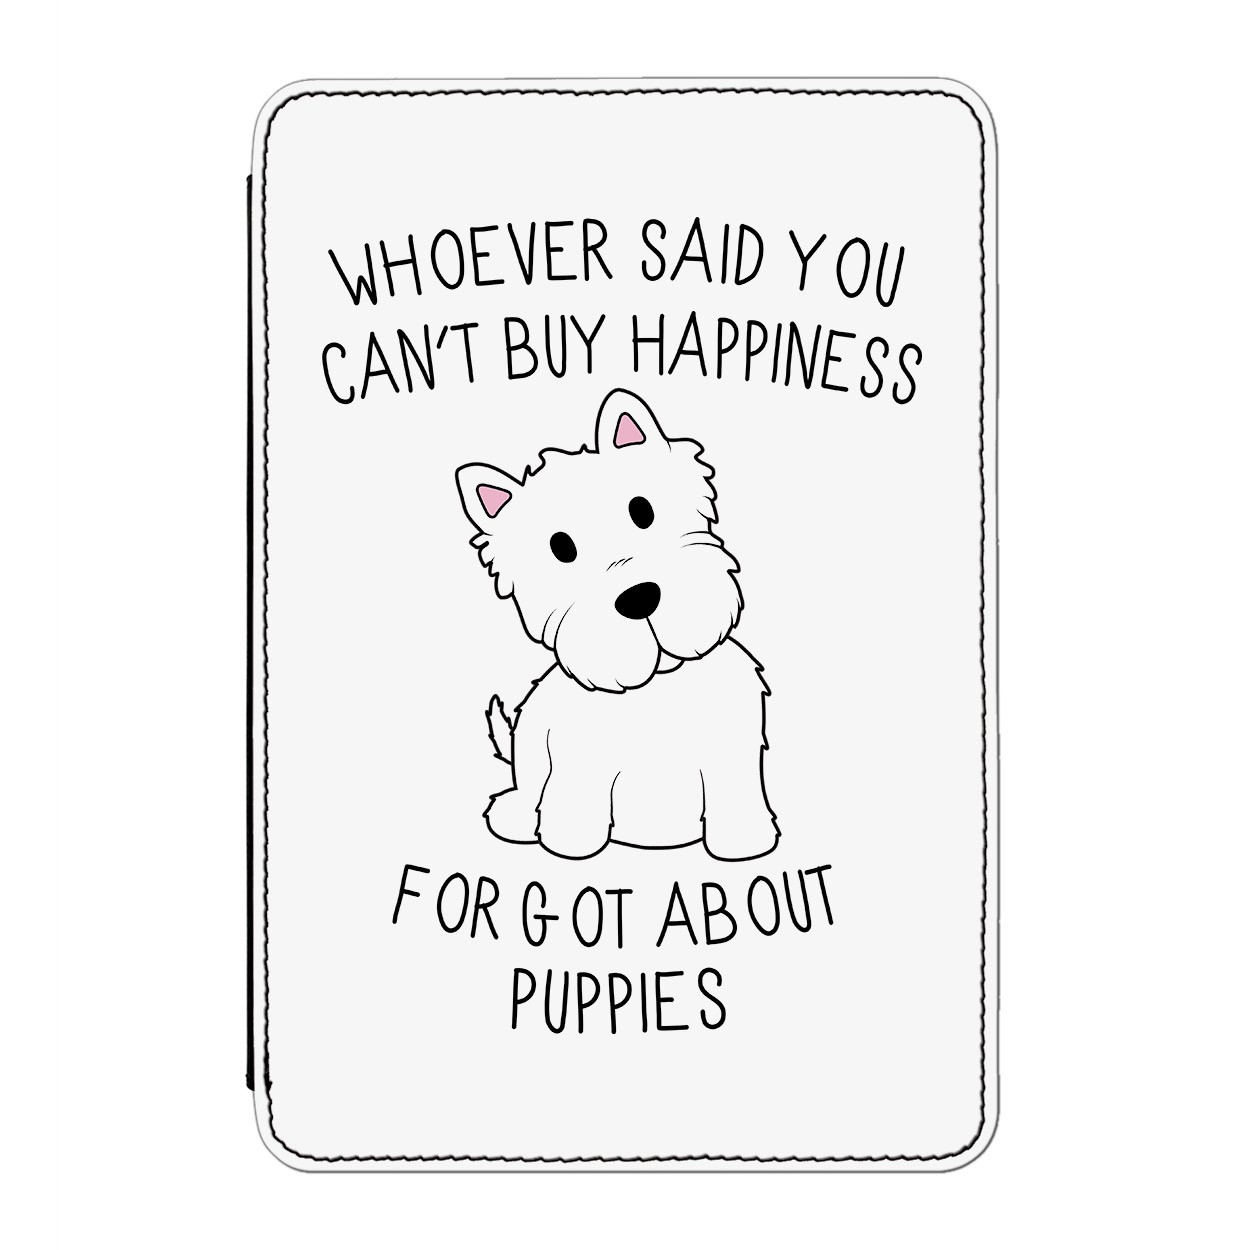 Whoever Said You Can't Buy Happiness Forgot About Puppies Case Cover for iPad Mini 1 2 3